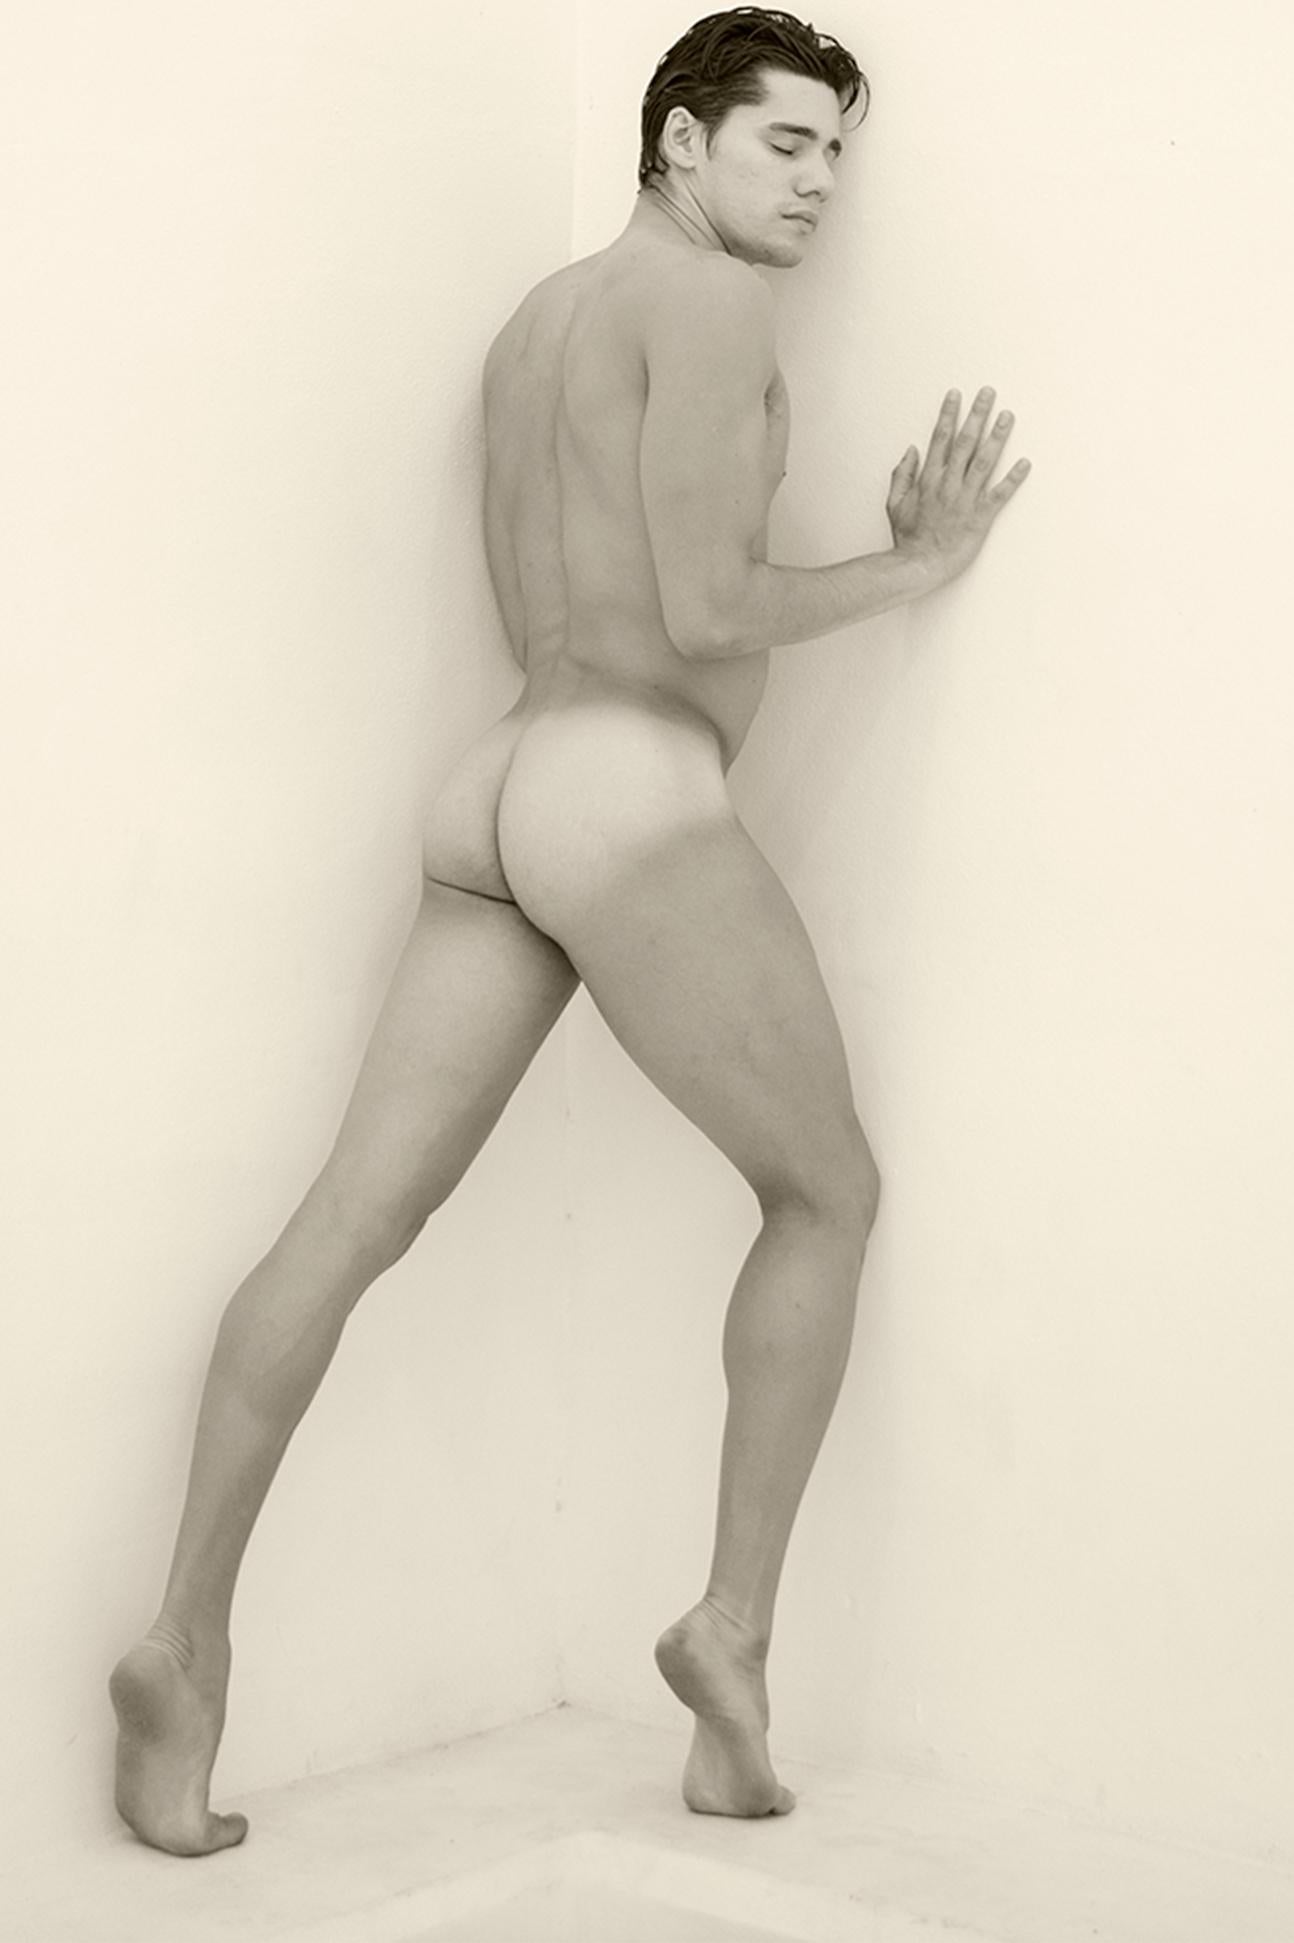 Man against wall one by Ricky Cohete 
From Motion series
Sepia Archival Pigment print
Medium 36